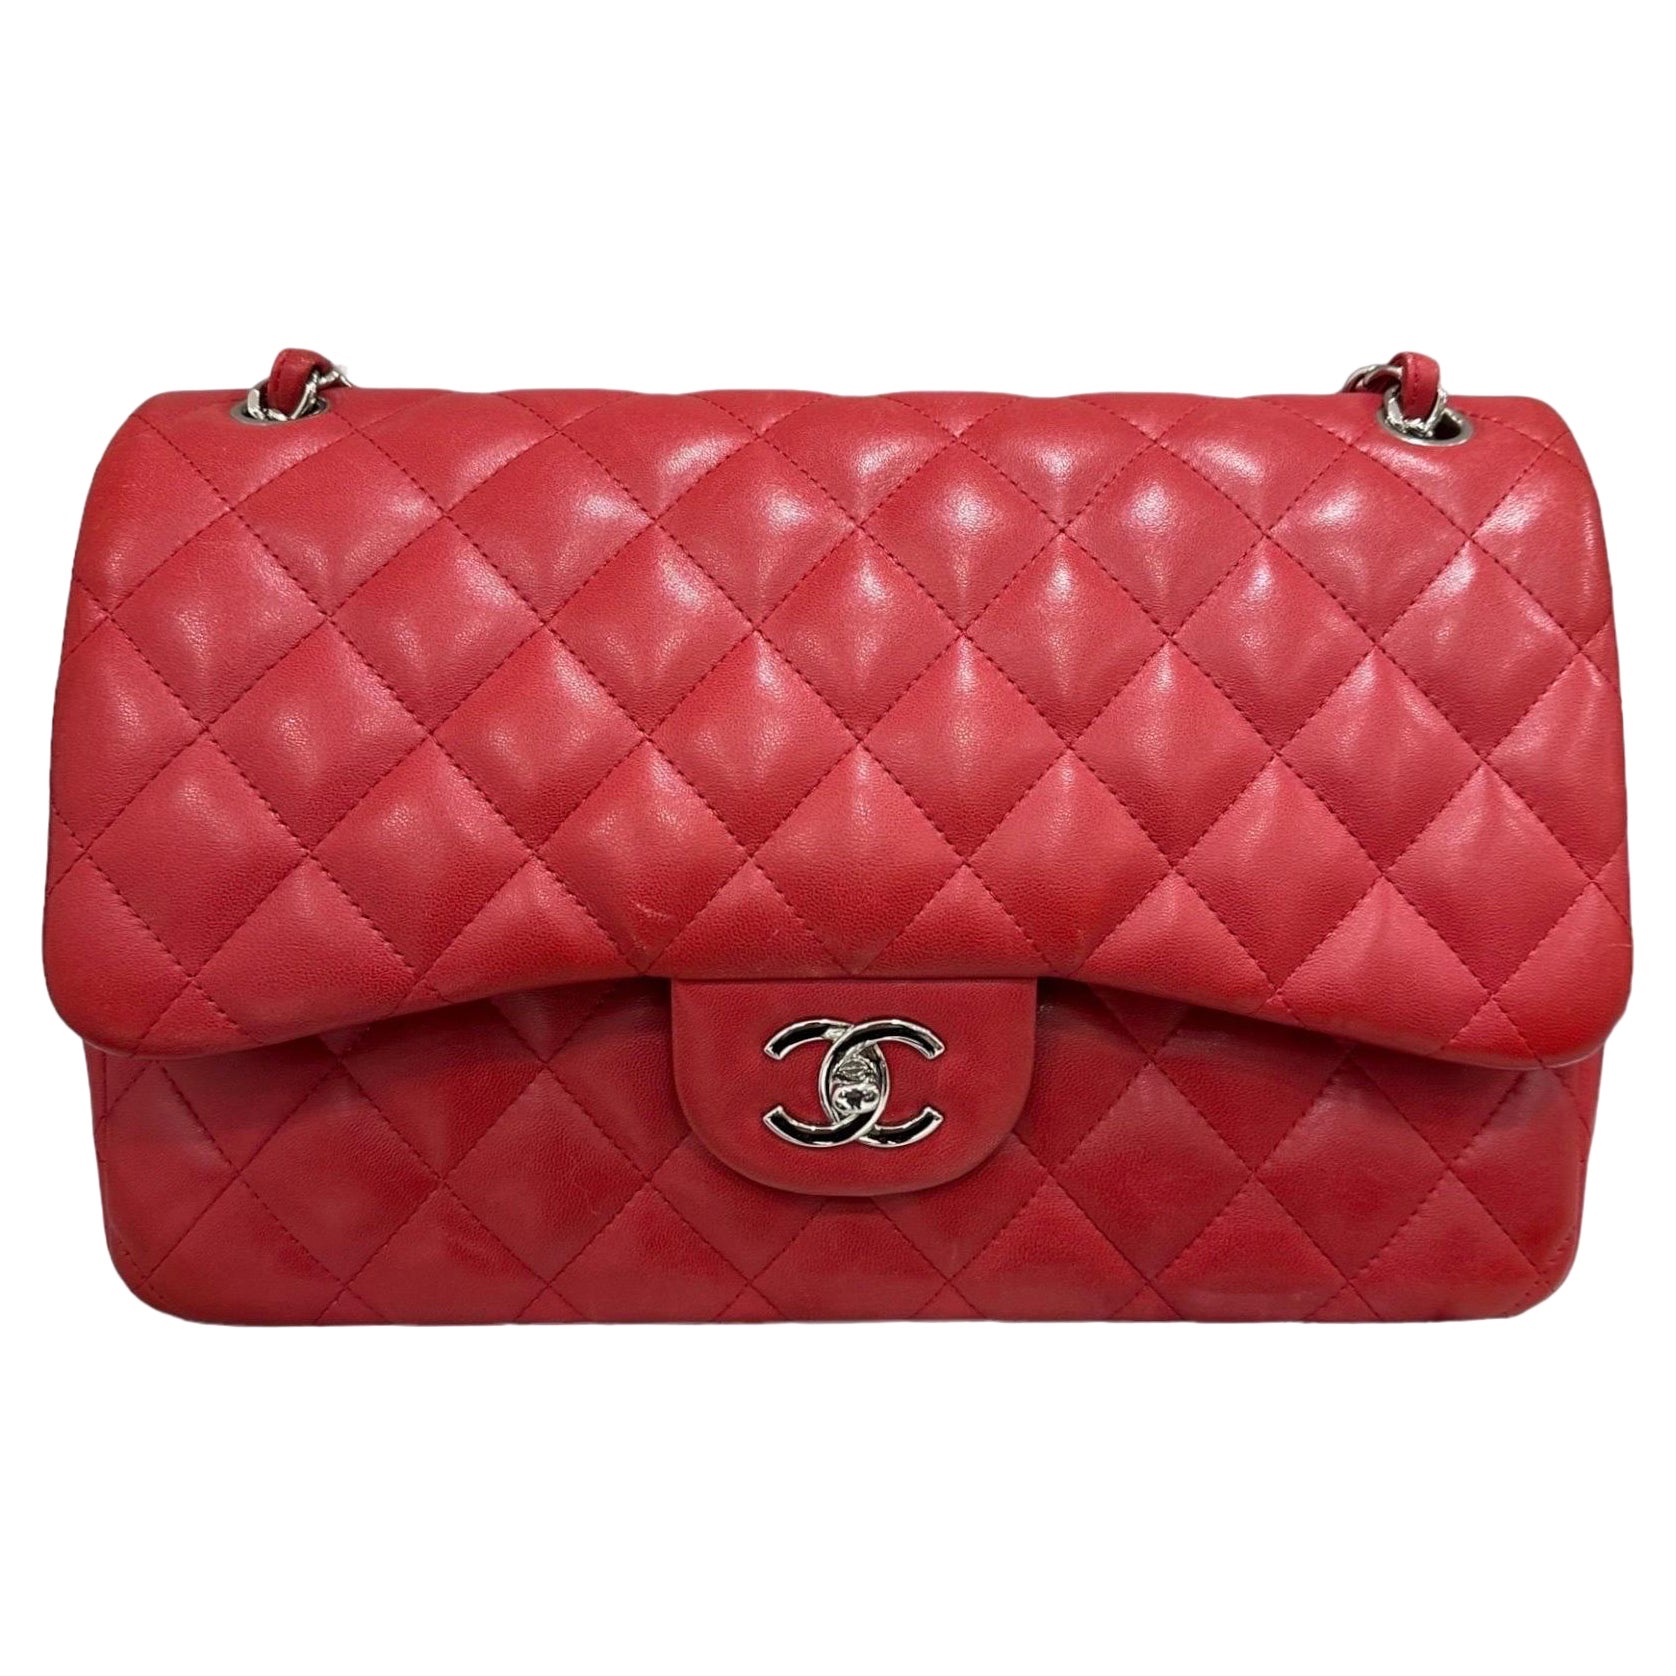 Borsa A Tracolla Chanel Timeless Jumbo Rossa 2013/2014 For Sale